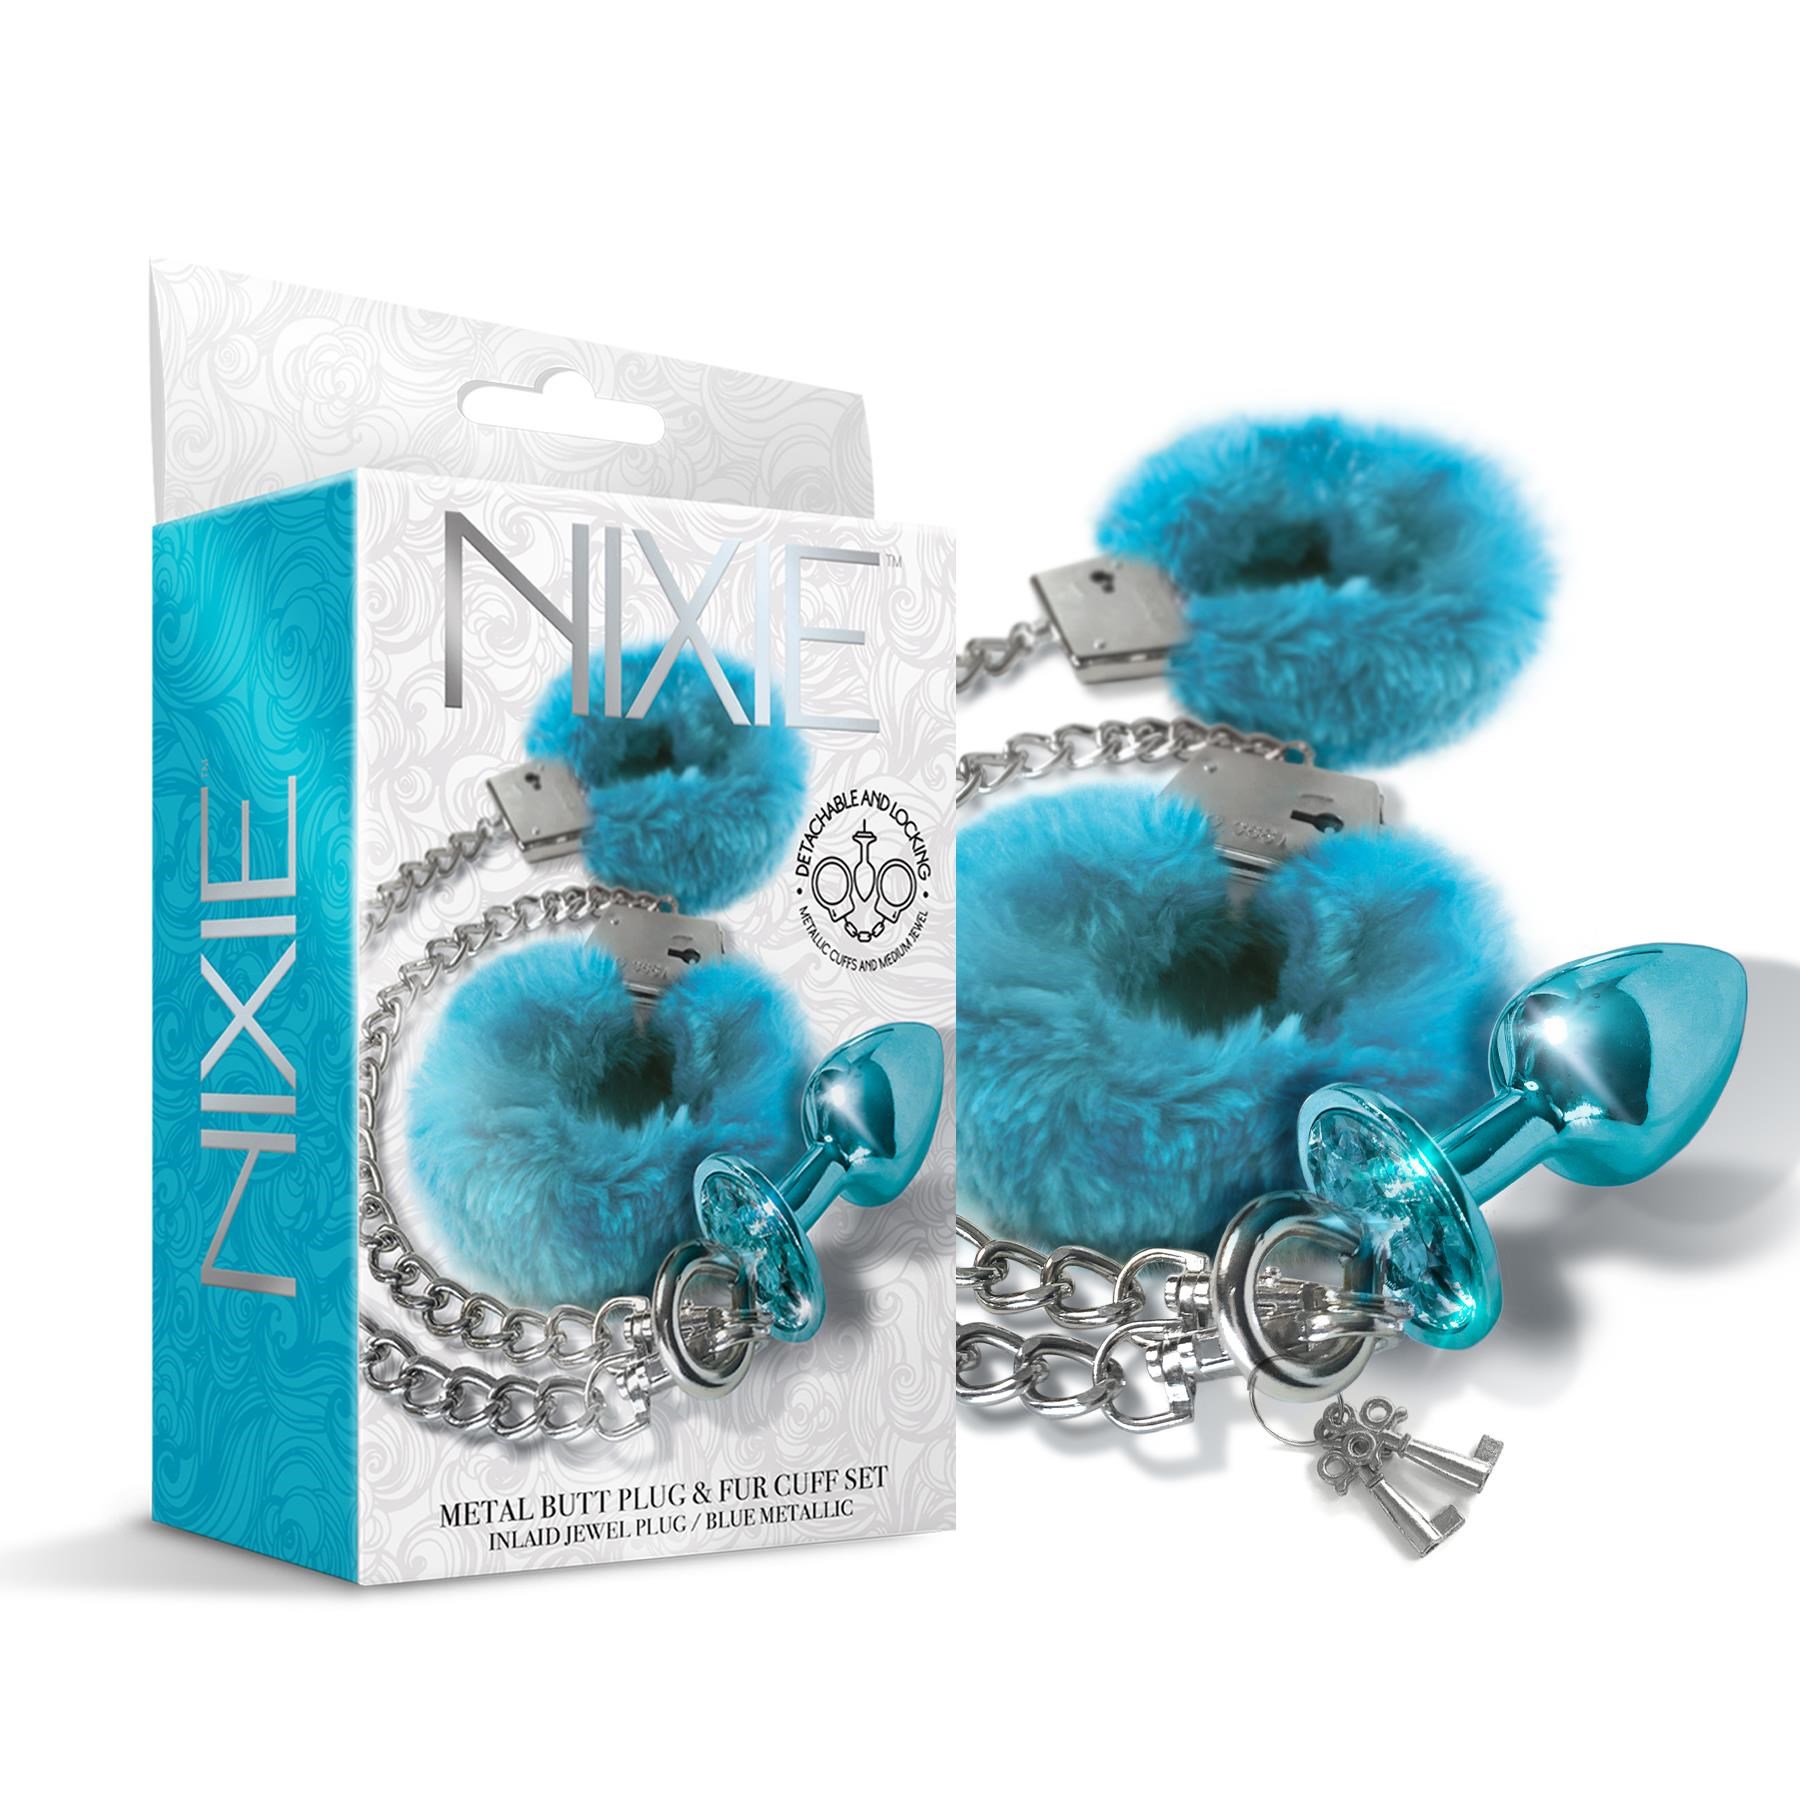 Nixie Metal Butt Plug and Fur Cuff Set - Product and Packaging Shot - Blue